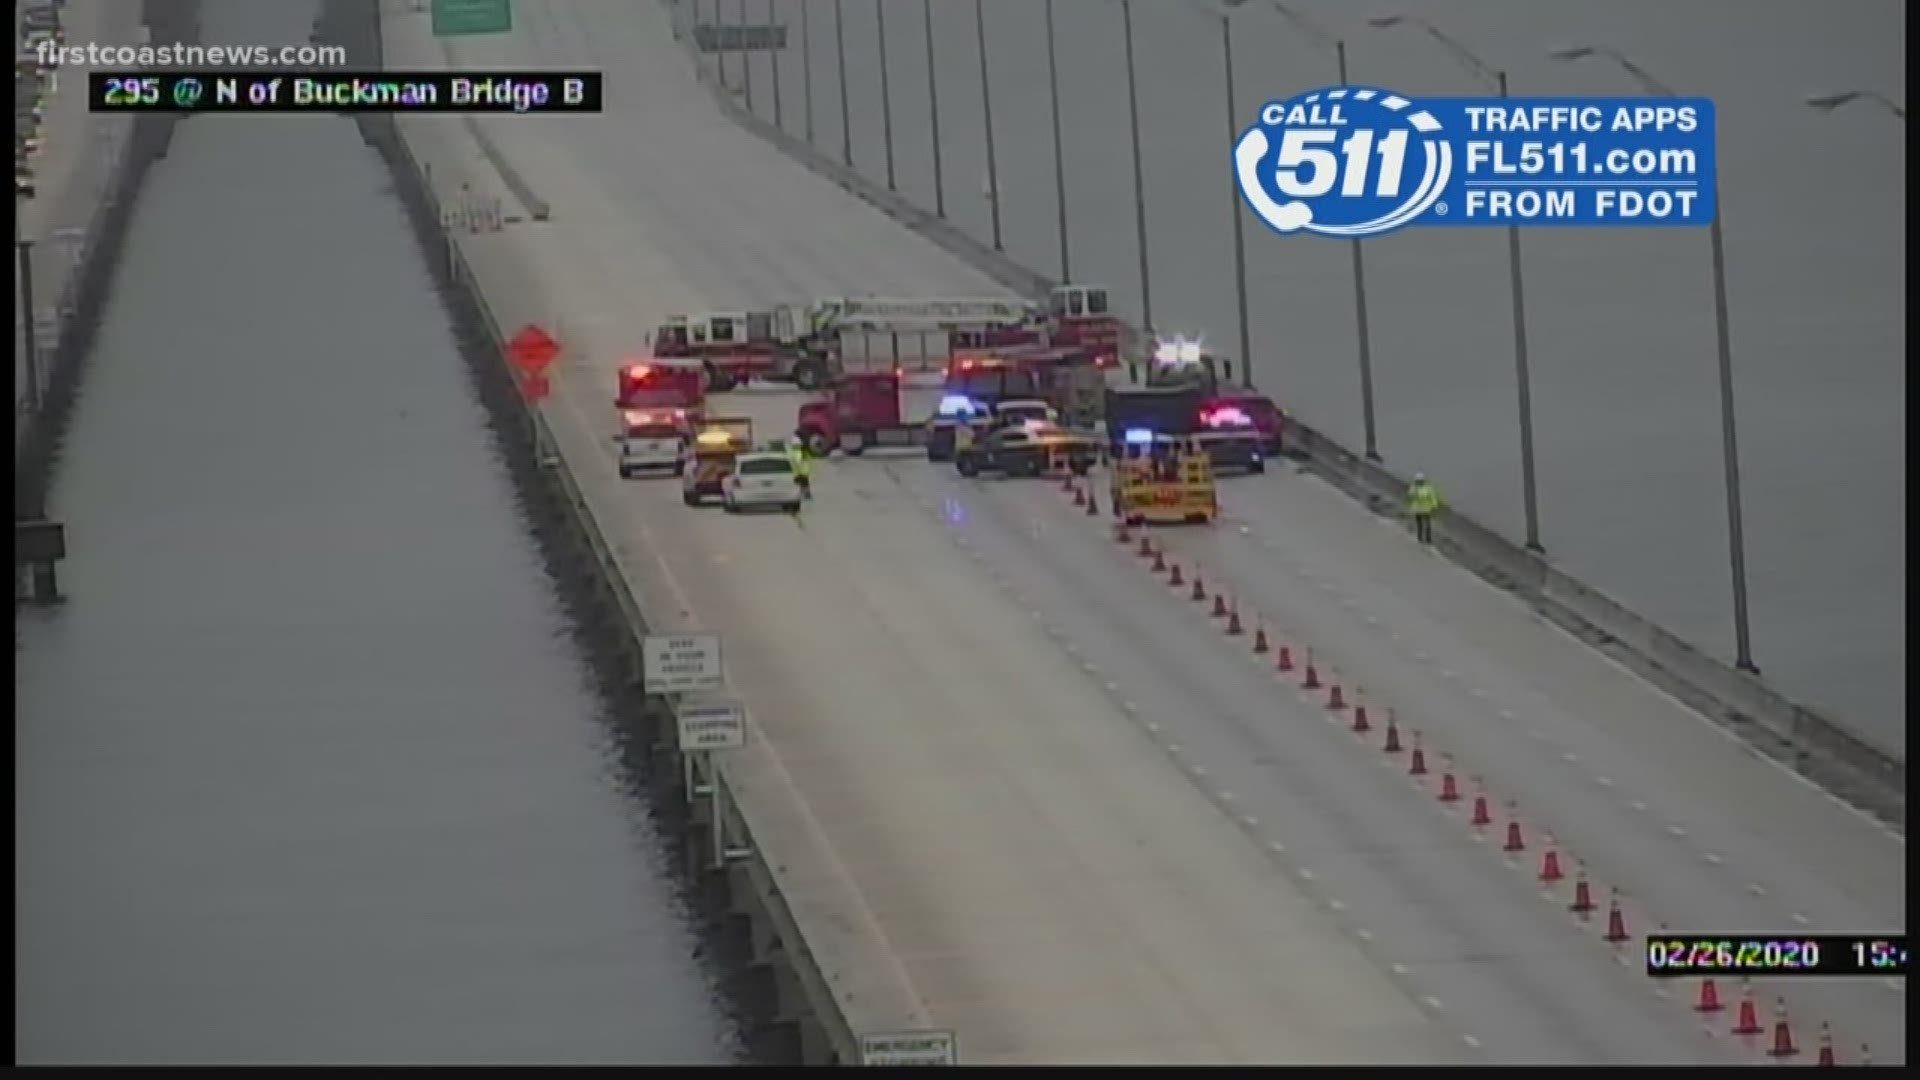 Two people were killed following a crash on the Buckman Bridge Wednesday, according to the Florida Highway Patrol.